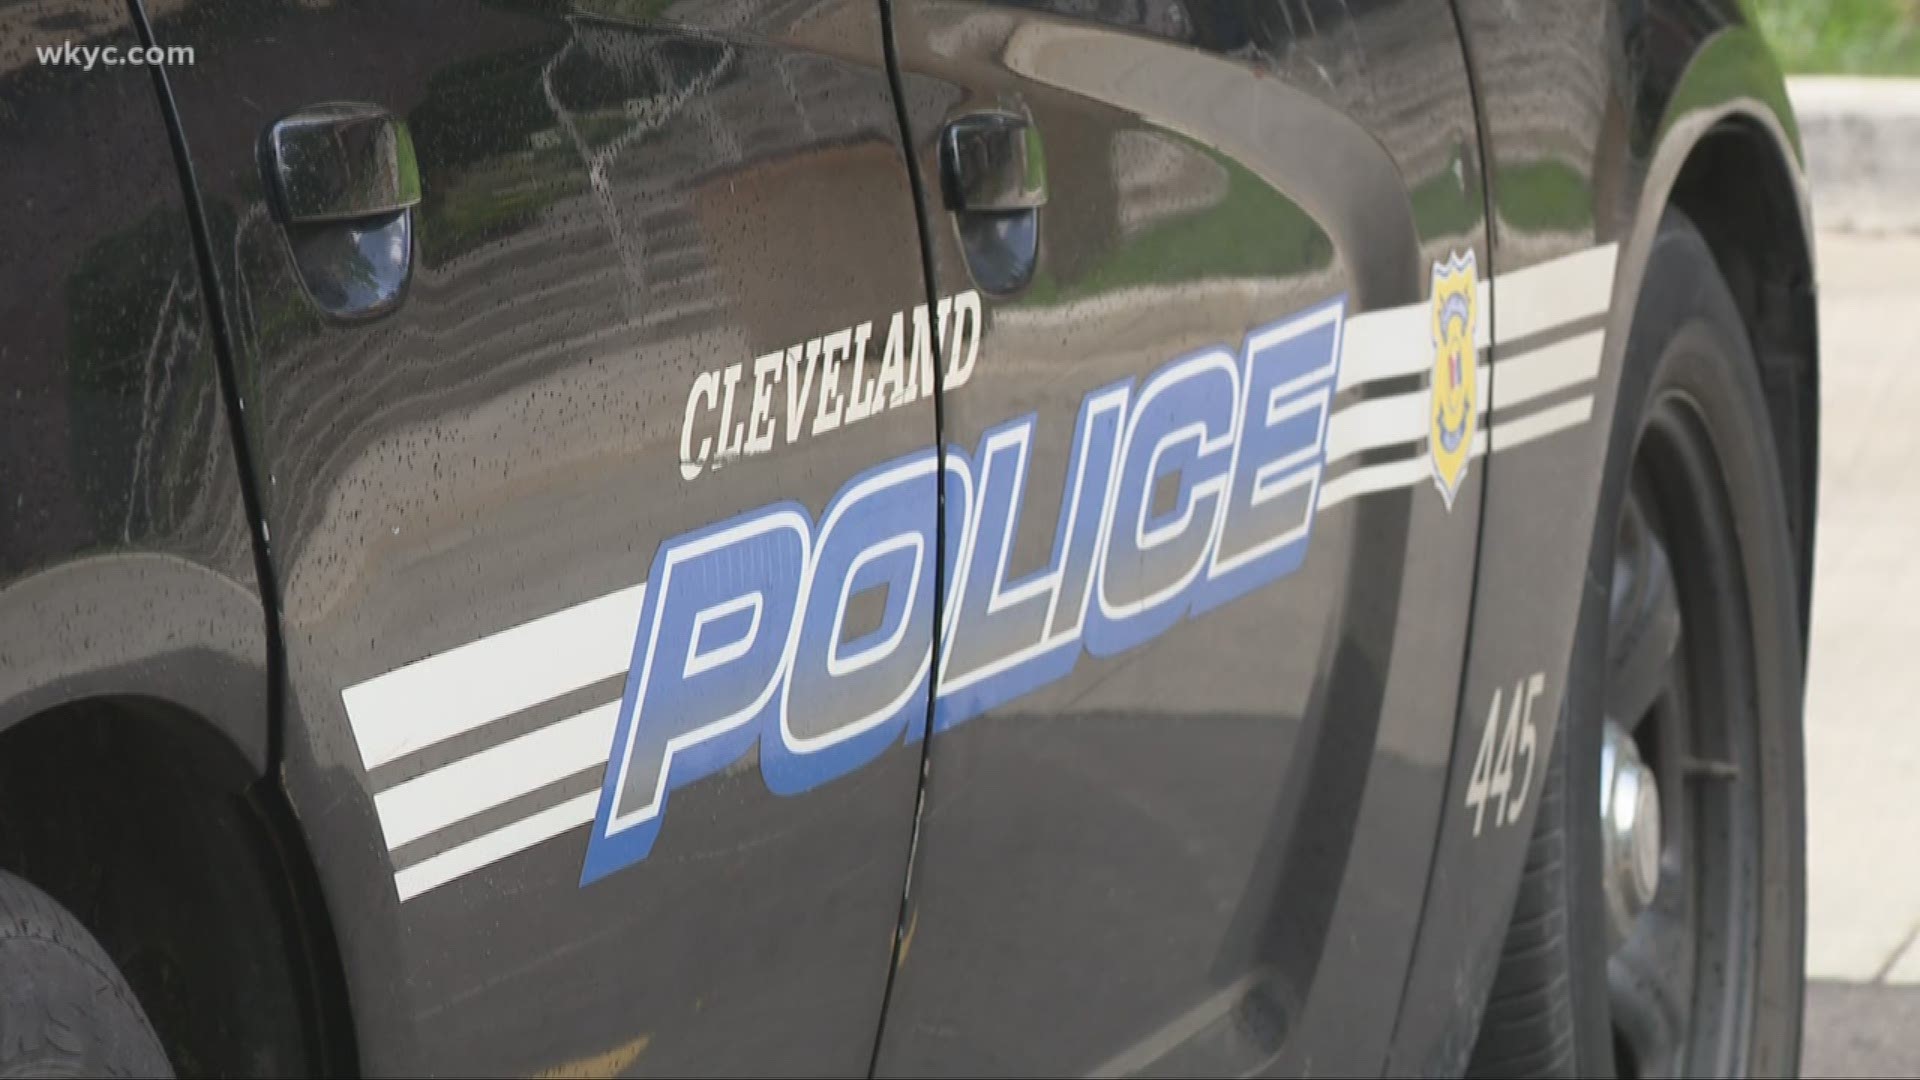 Cleveland police officers could be disciplined for giving fake badge number